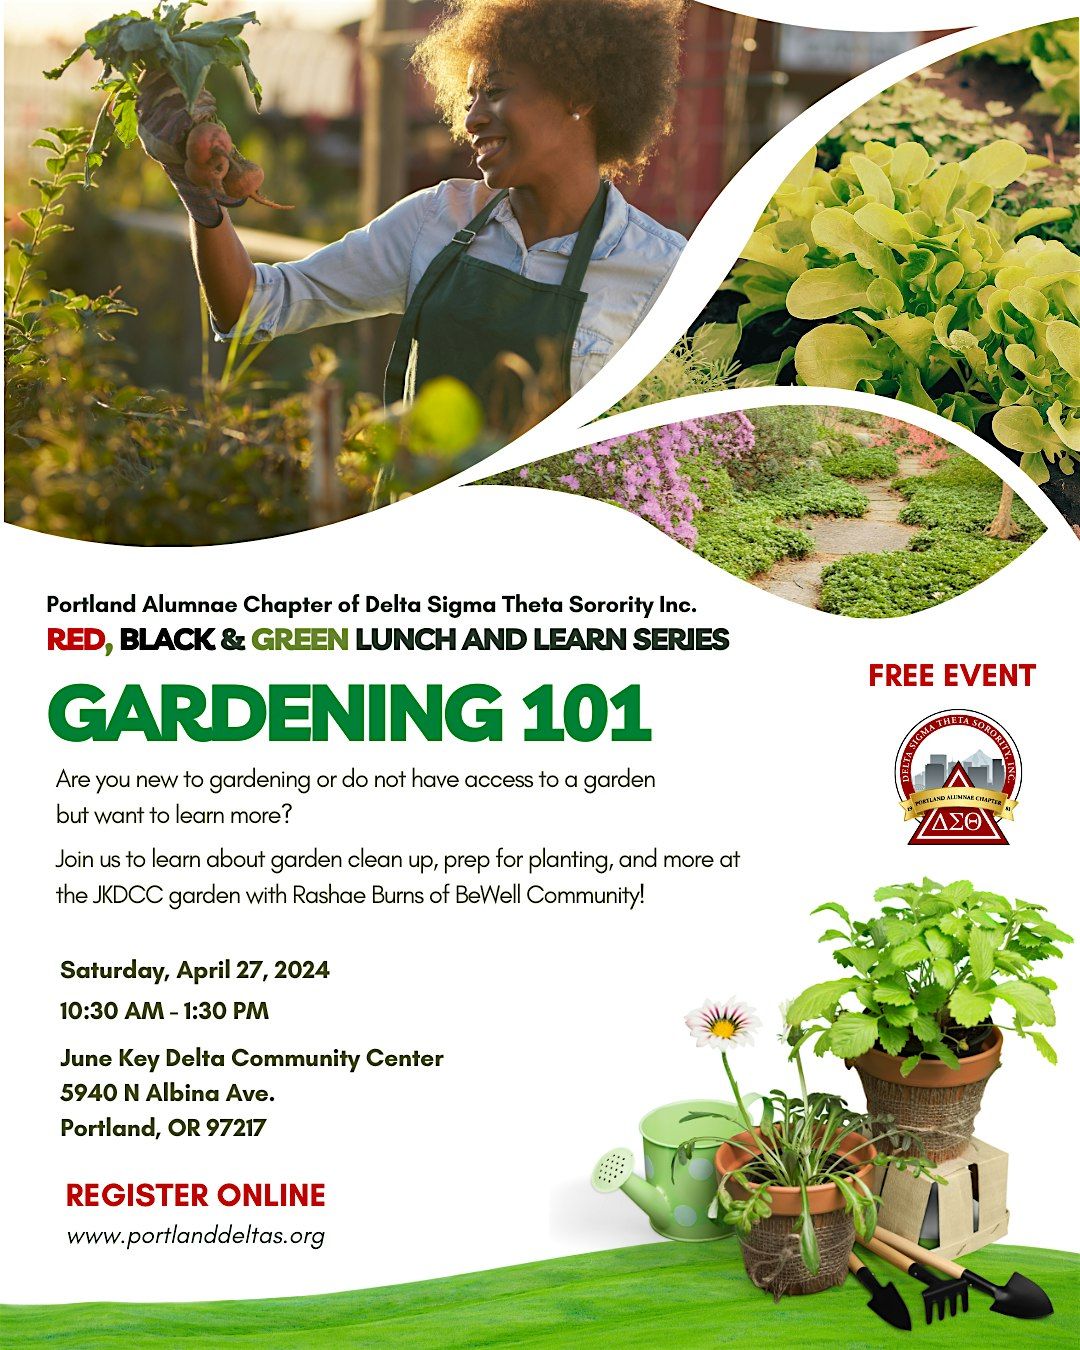 RED, Black & Green Lunch and Learn: Gardening 101